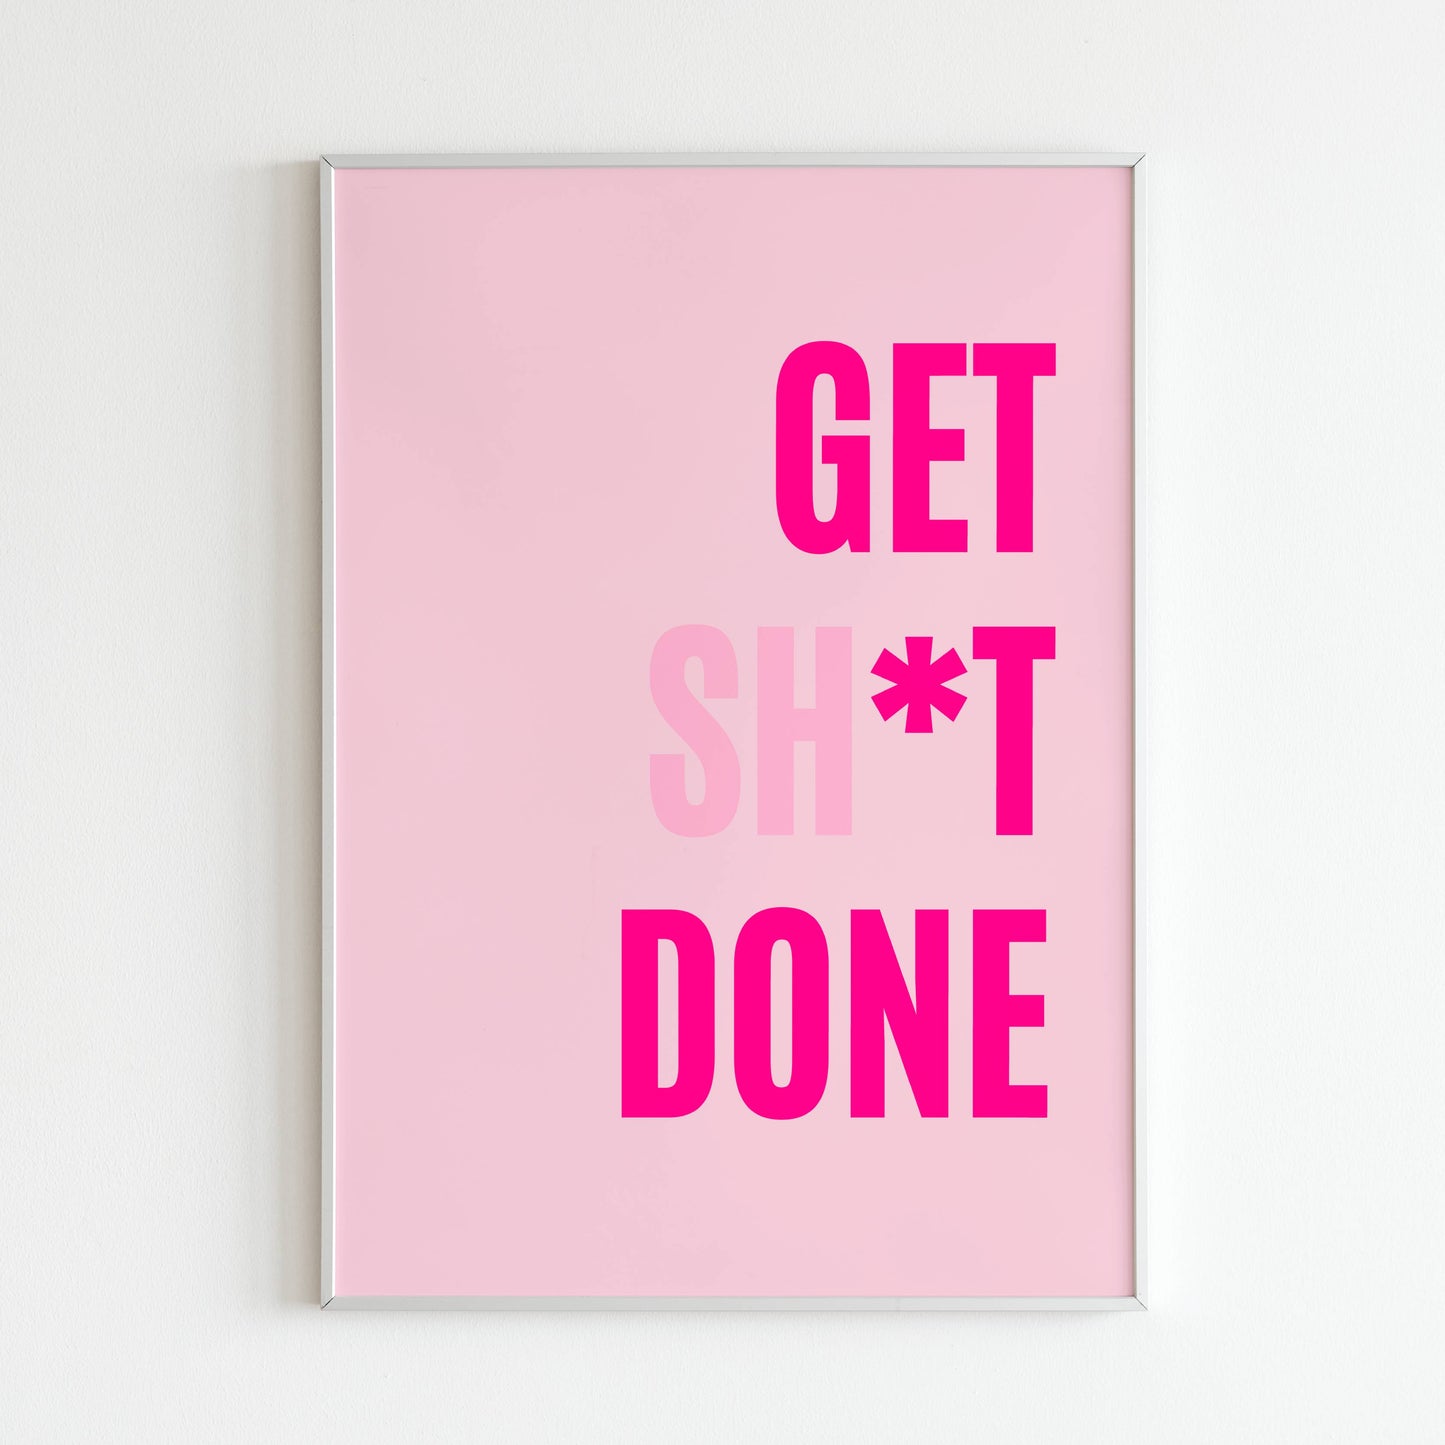 Downloadable "Get shit done" wall art for a productivity boost (consider a milder option if needed).